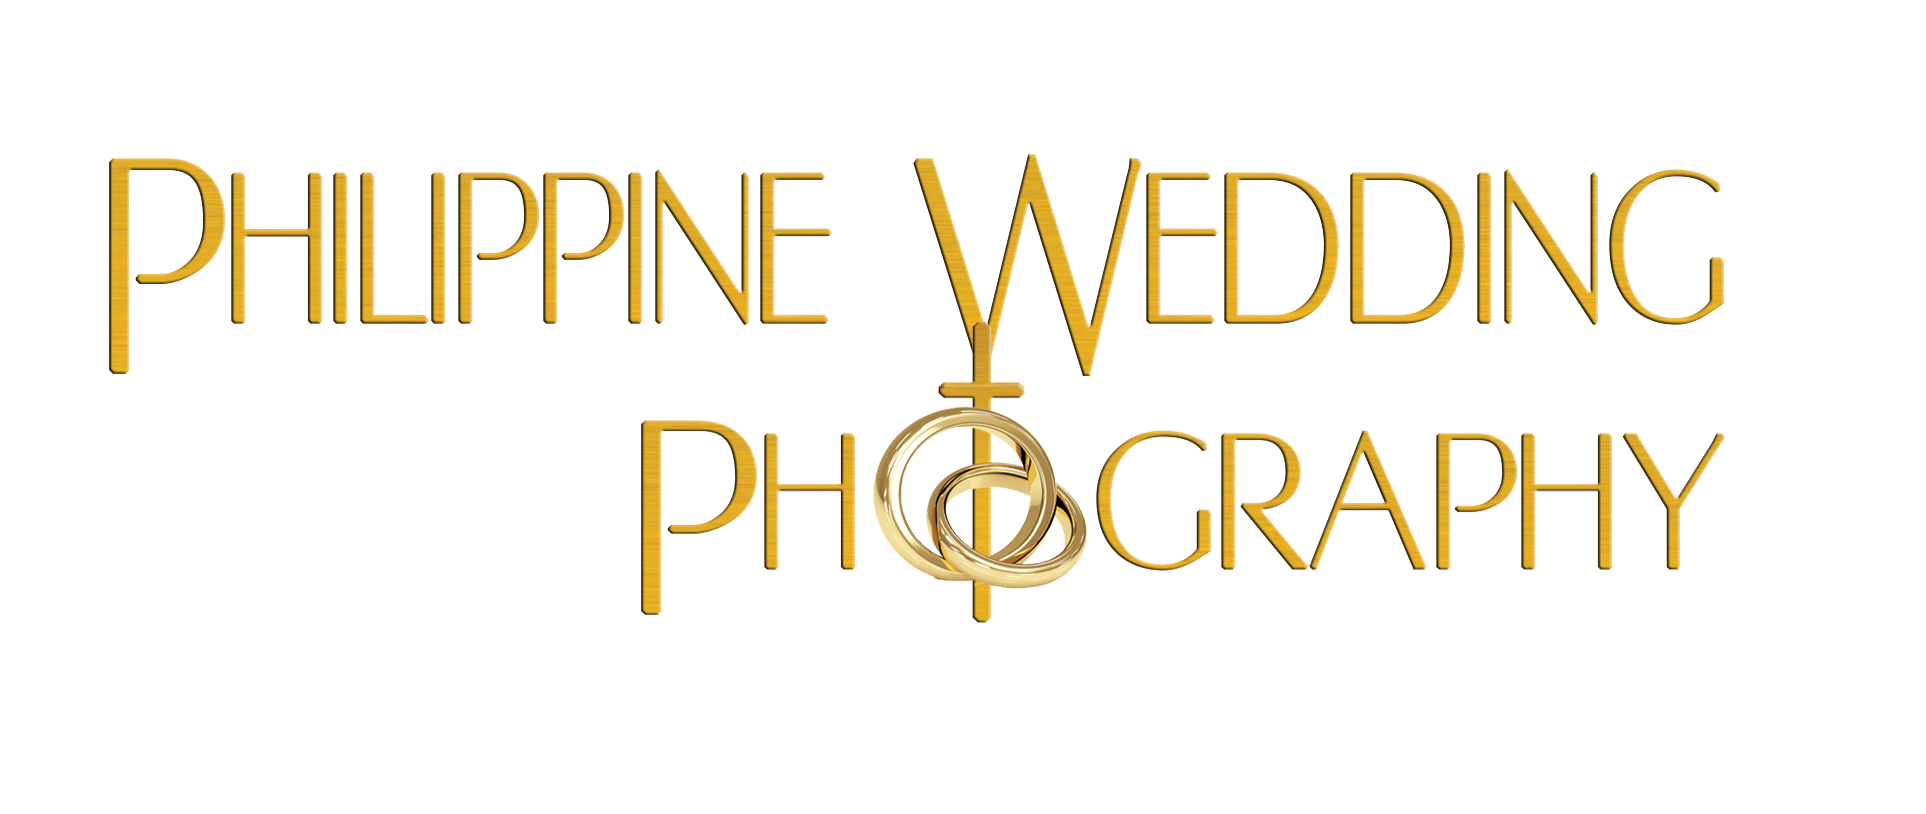 Philippine Wedding Photography and Videography